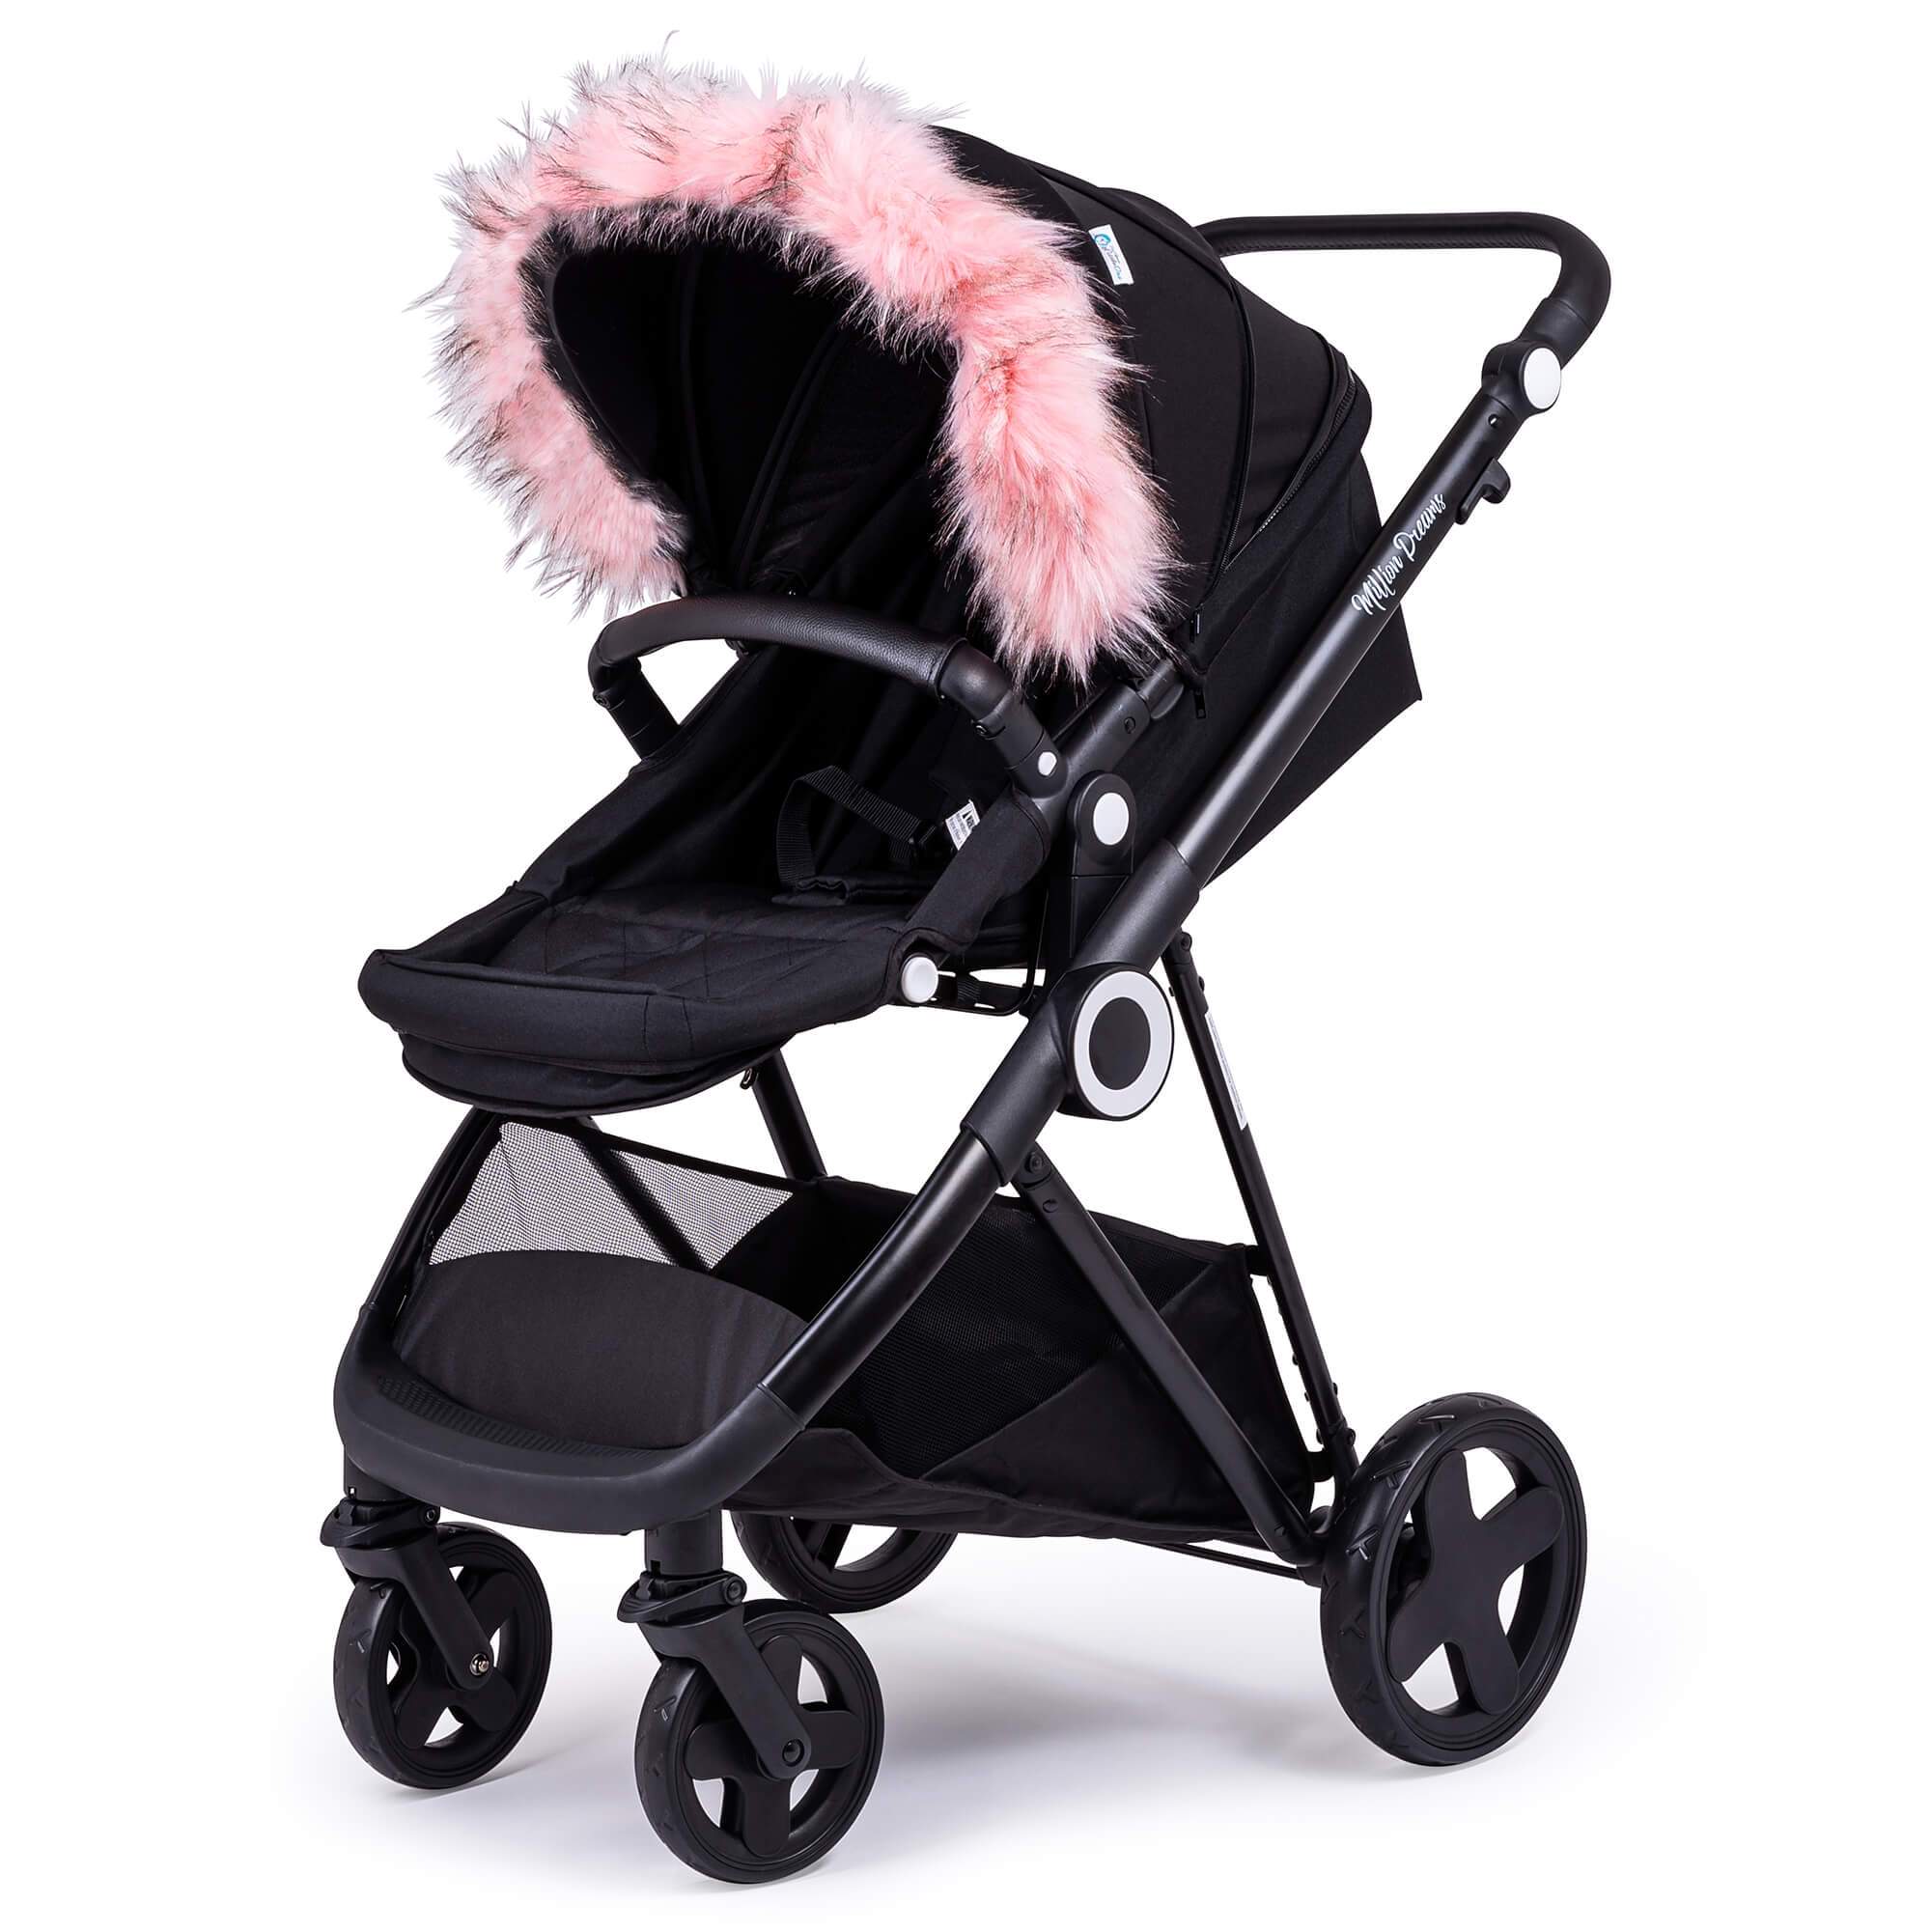 Pram Fur Hood Trim Attachment For Pushchair Compatible with My Child - Light Pink / Fits All Models | For Your Little One